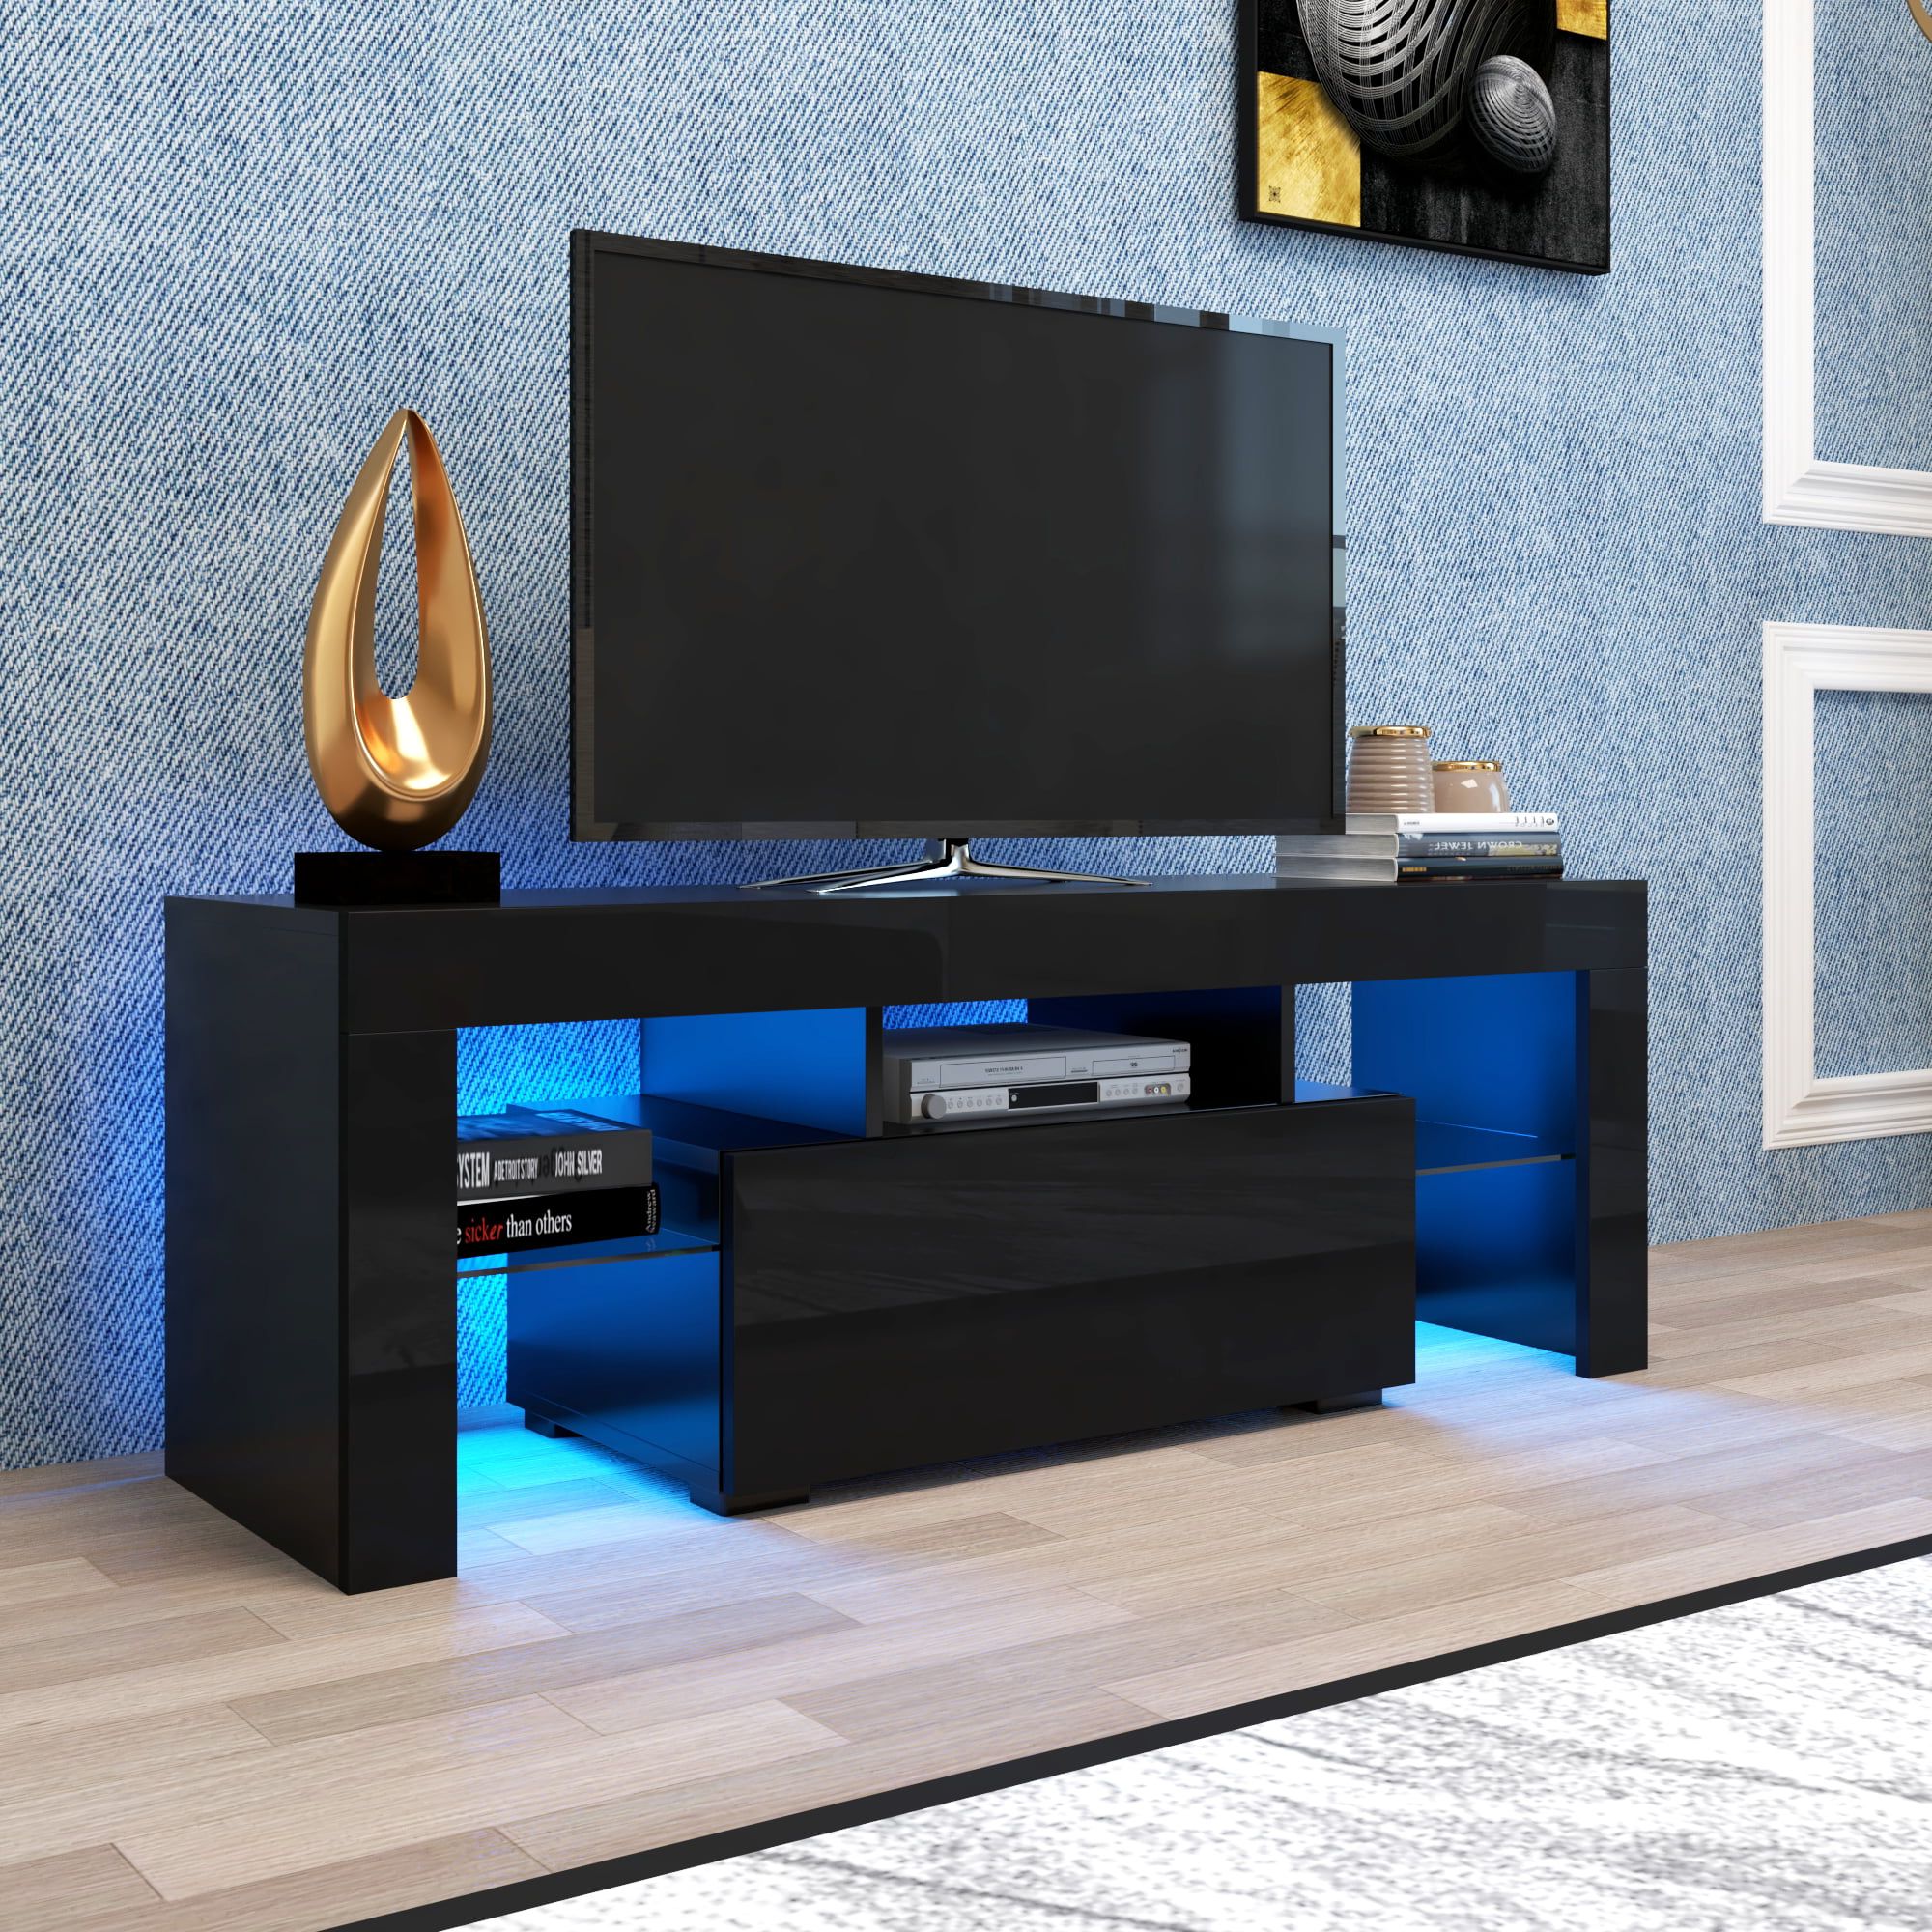 Black Rgb Entertainment Centers For Well Known Black Tv Stand For Up To 65 Inch Tv, Yofe High Gloss Tv Stand With Led (View 4 of 15)